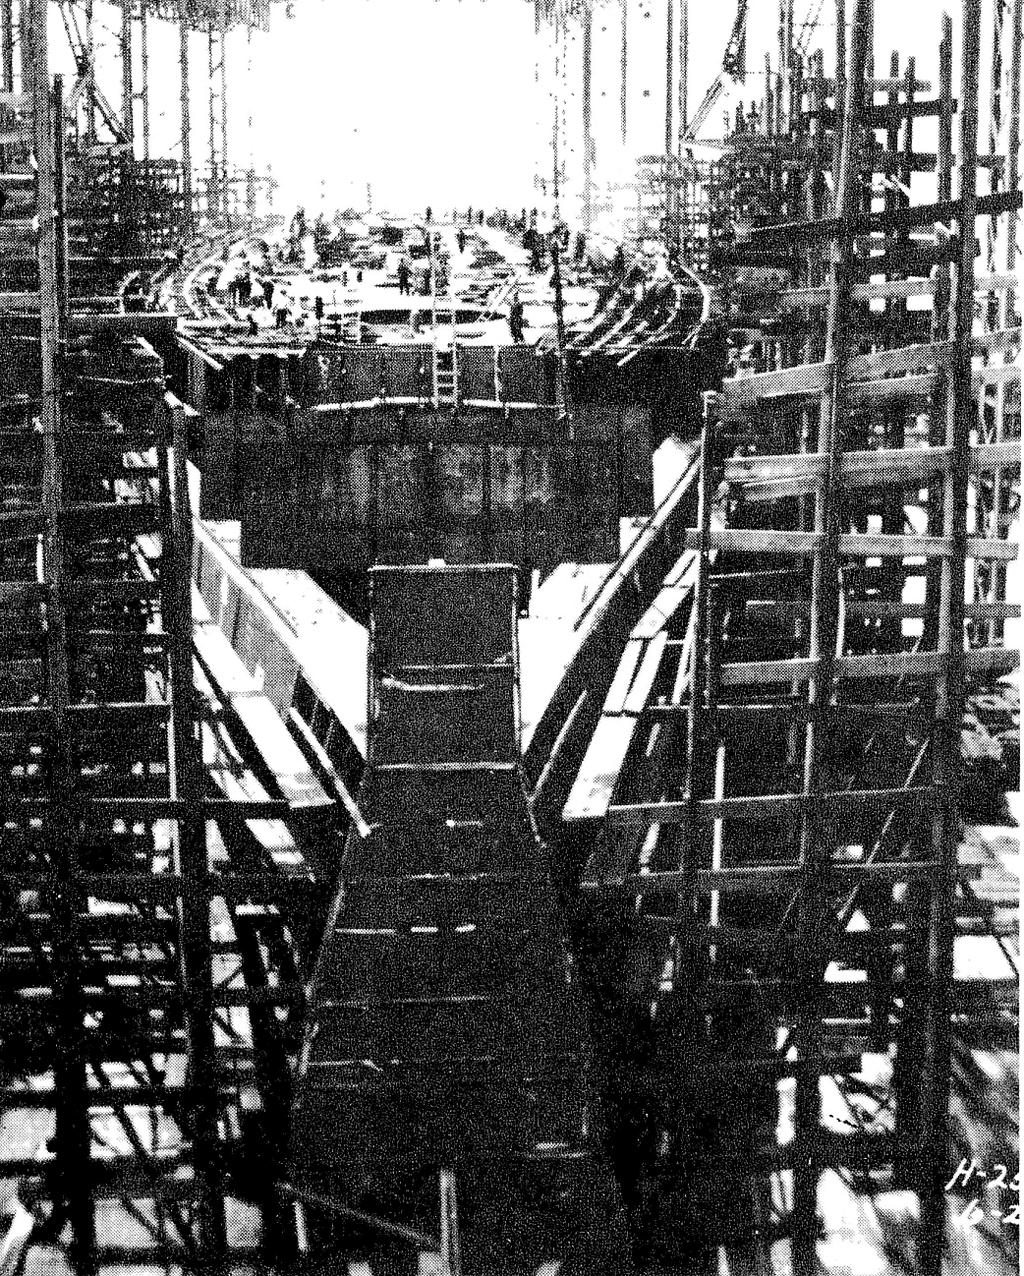 By early 1922, the Battle Cruiser CONSTELLATION (CC-2), under construction on Shipway #8, was 22% physically complete.